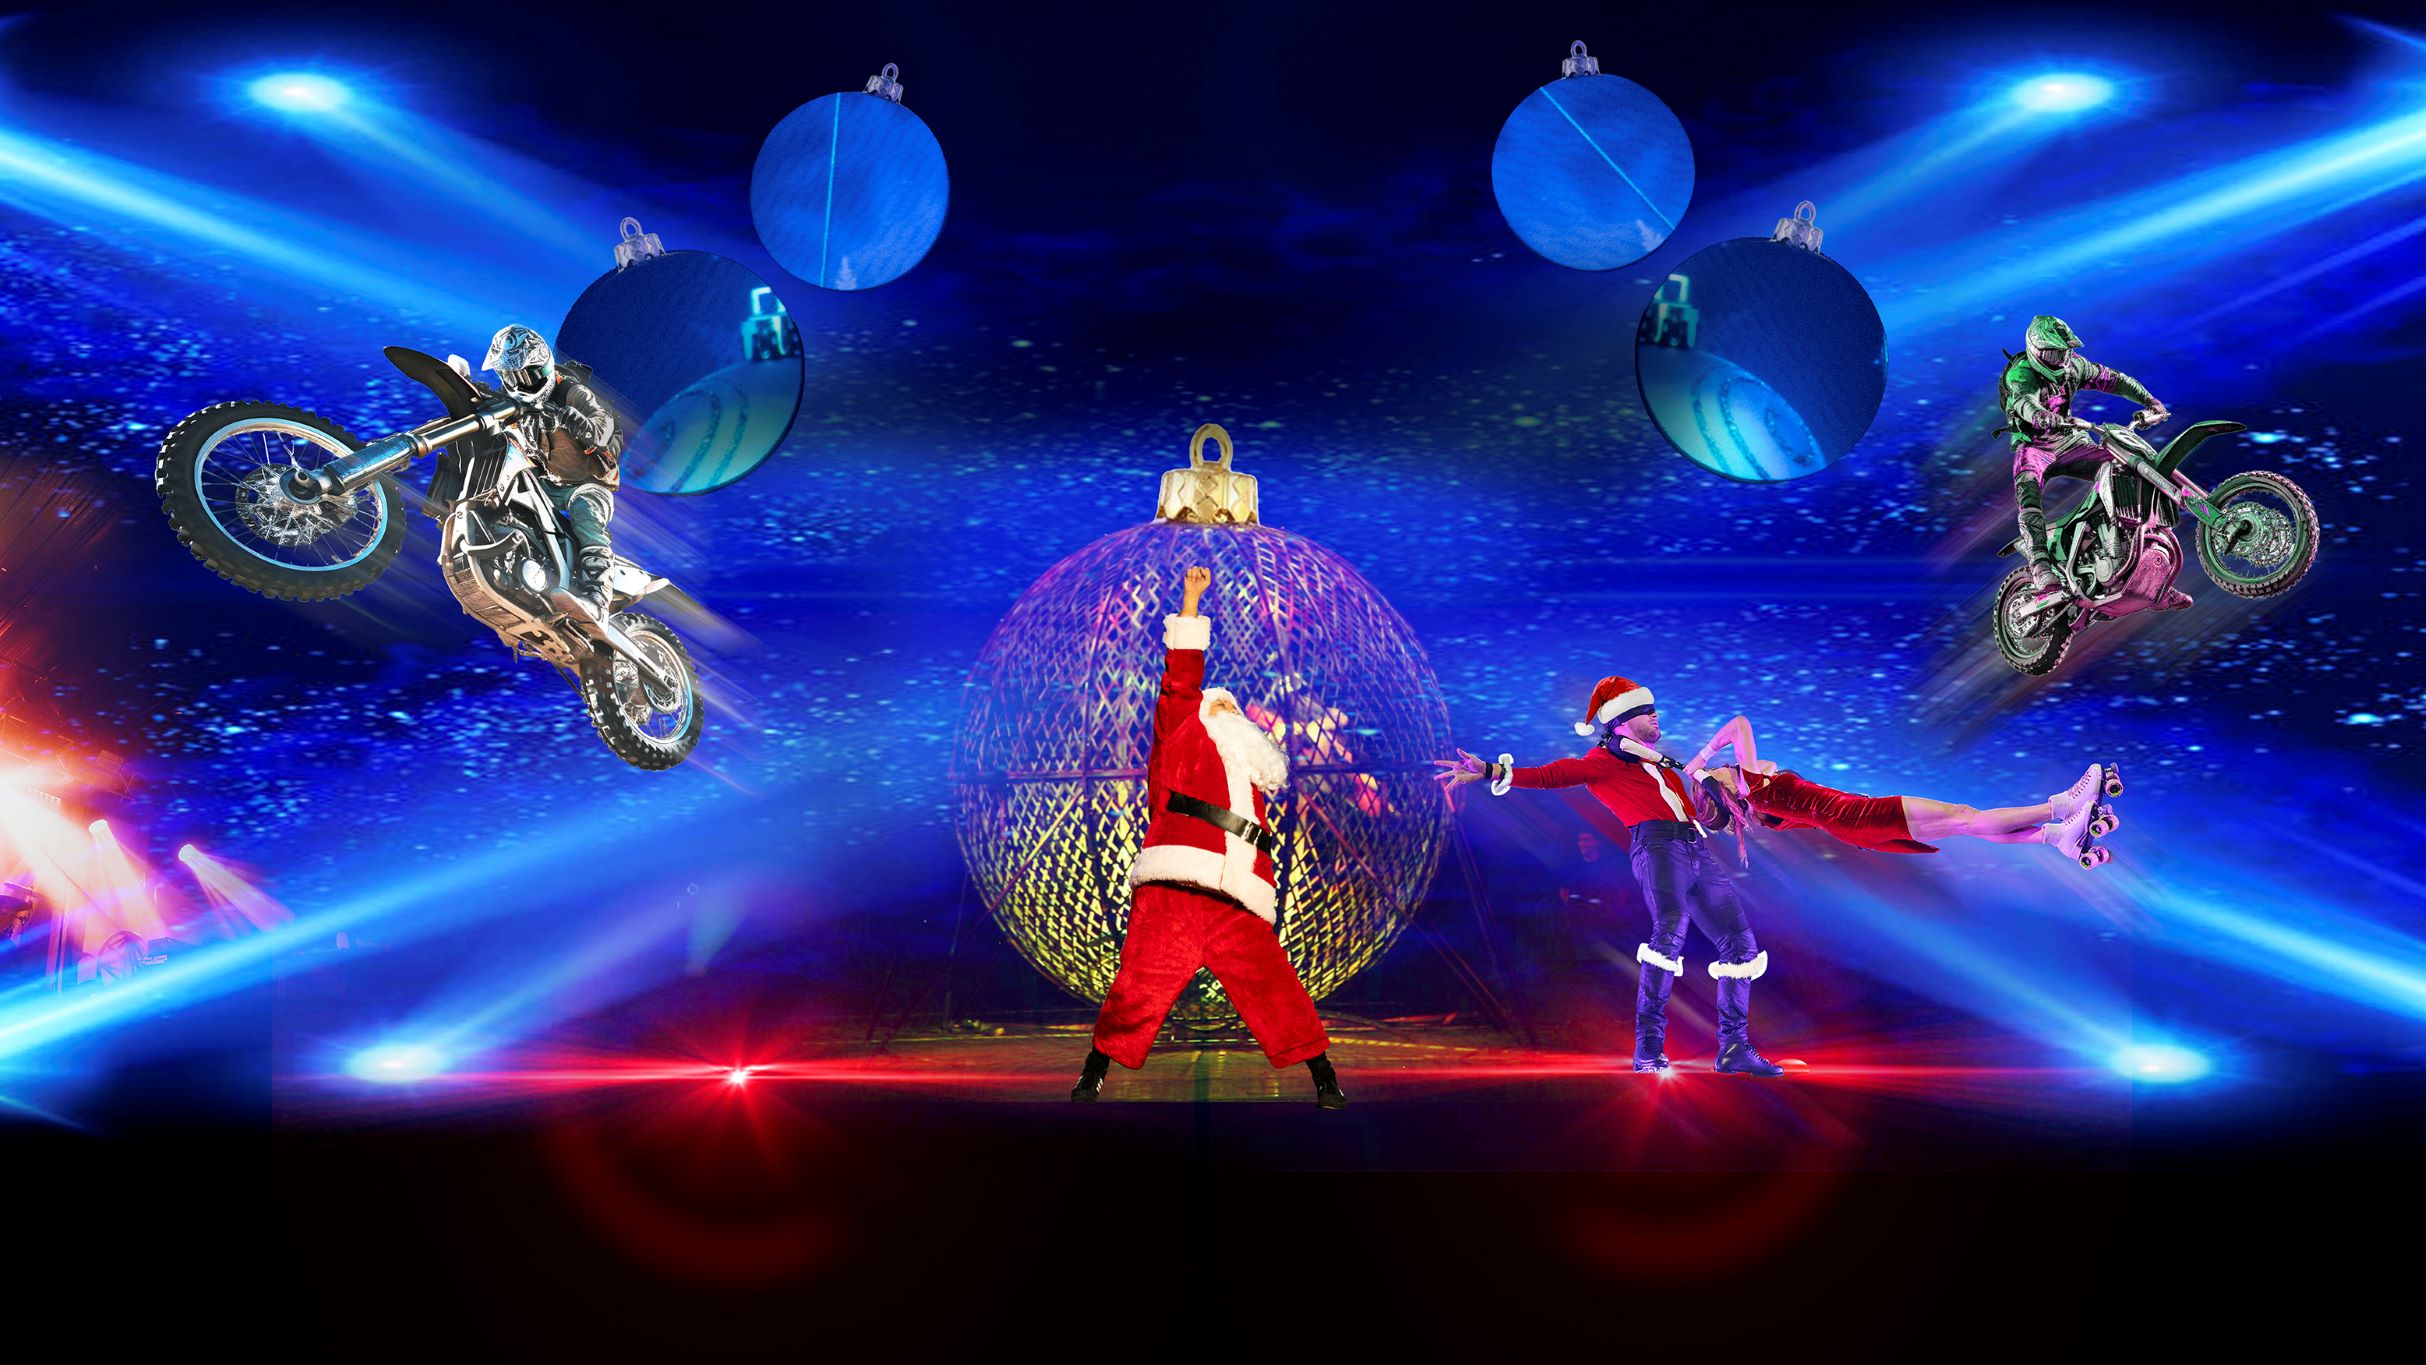 A Holiday Circus Spectacular! - A Christmas Rockstory in Winnipeg promo photo for Ticket Deals presale offer code